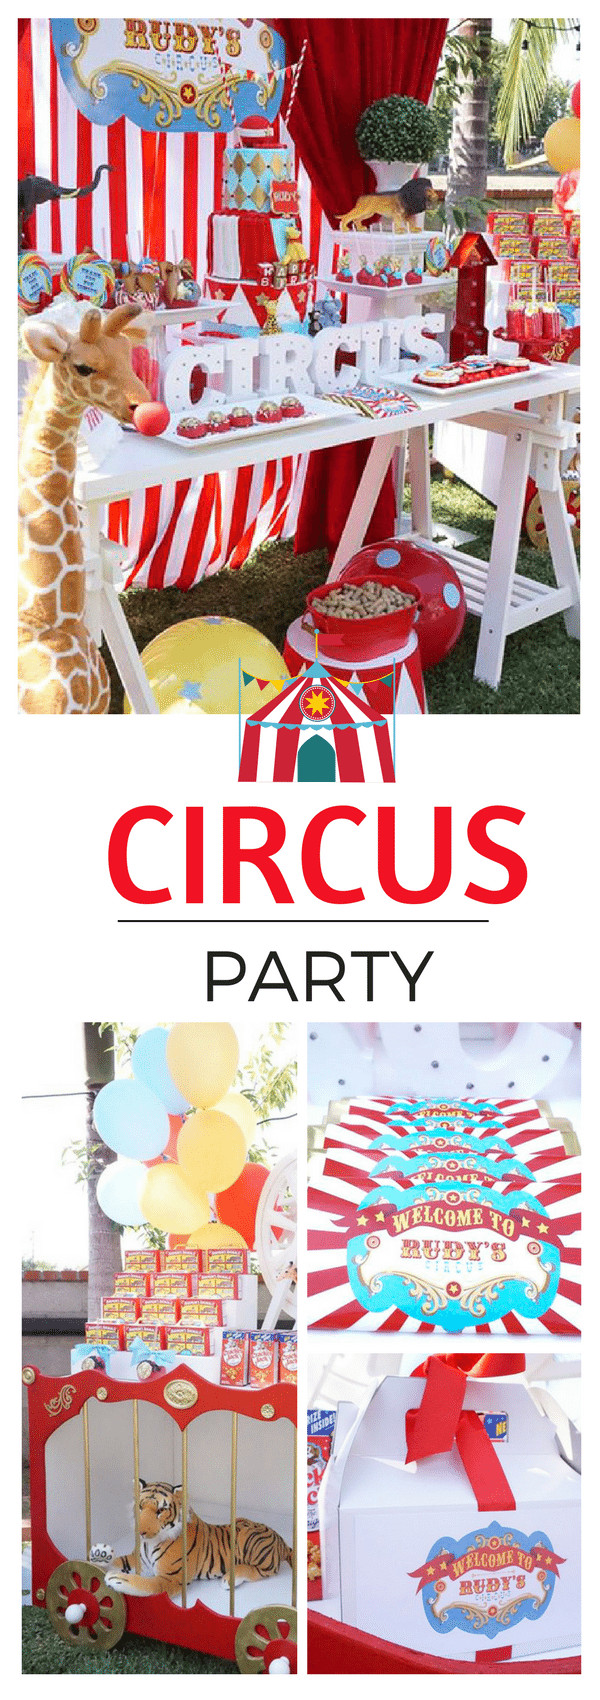 Circus Birthday Party
 Carnival Circus Party Ideas